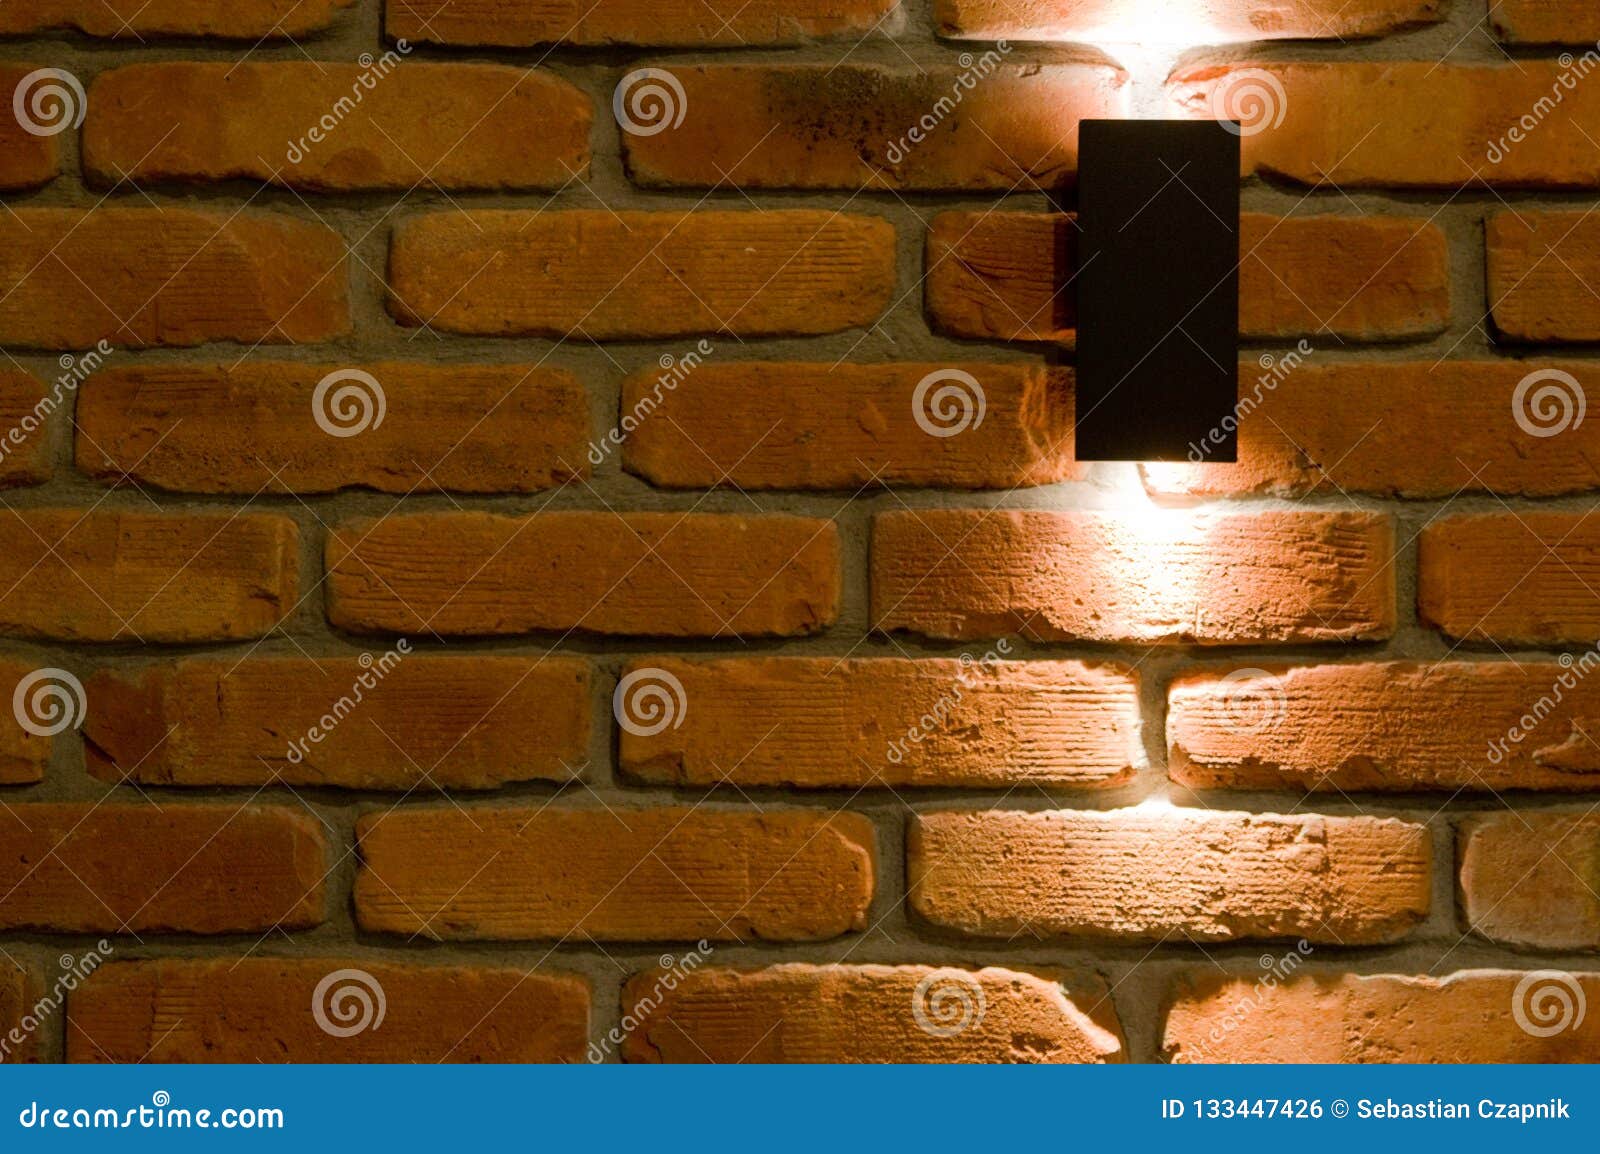 LED Wall Lighting, Red Brick and Light Background Stock Photo - Image of 133447426